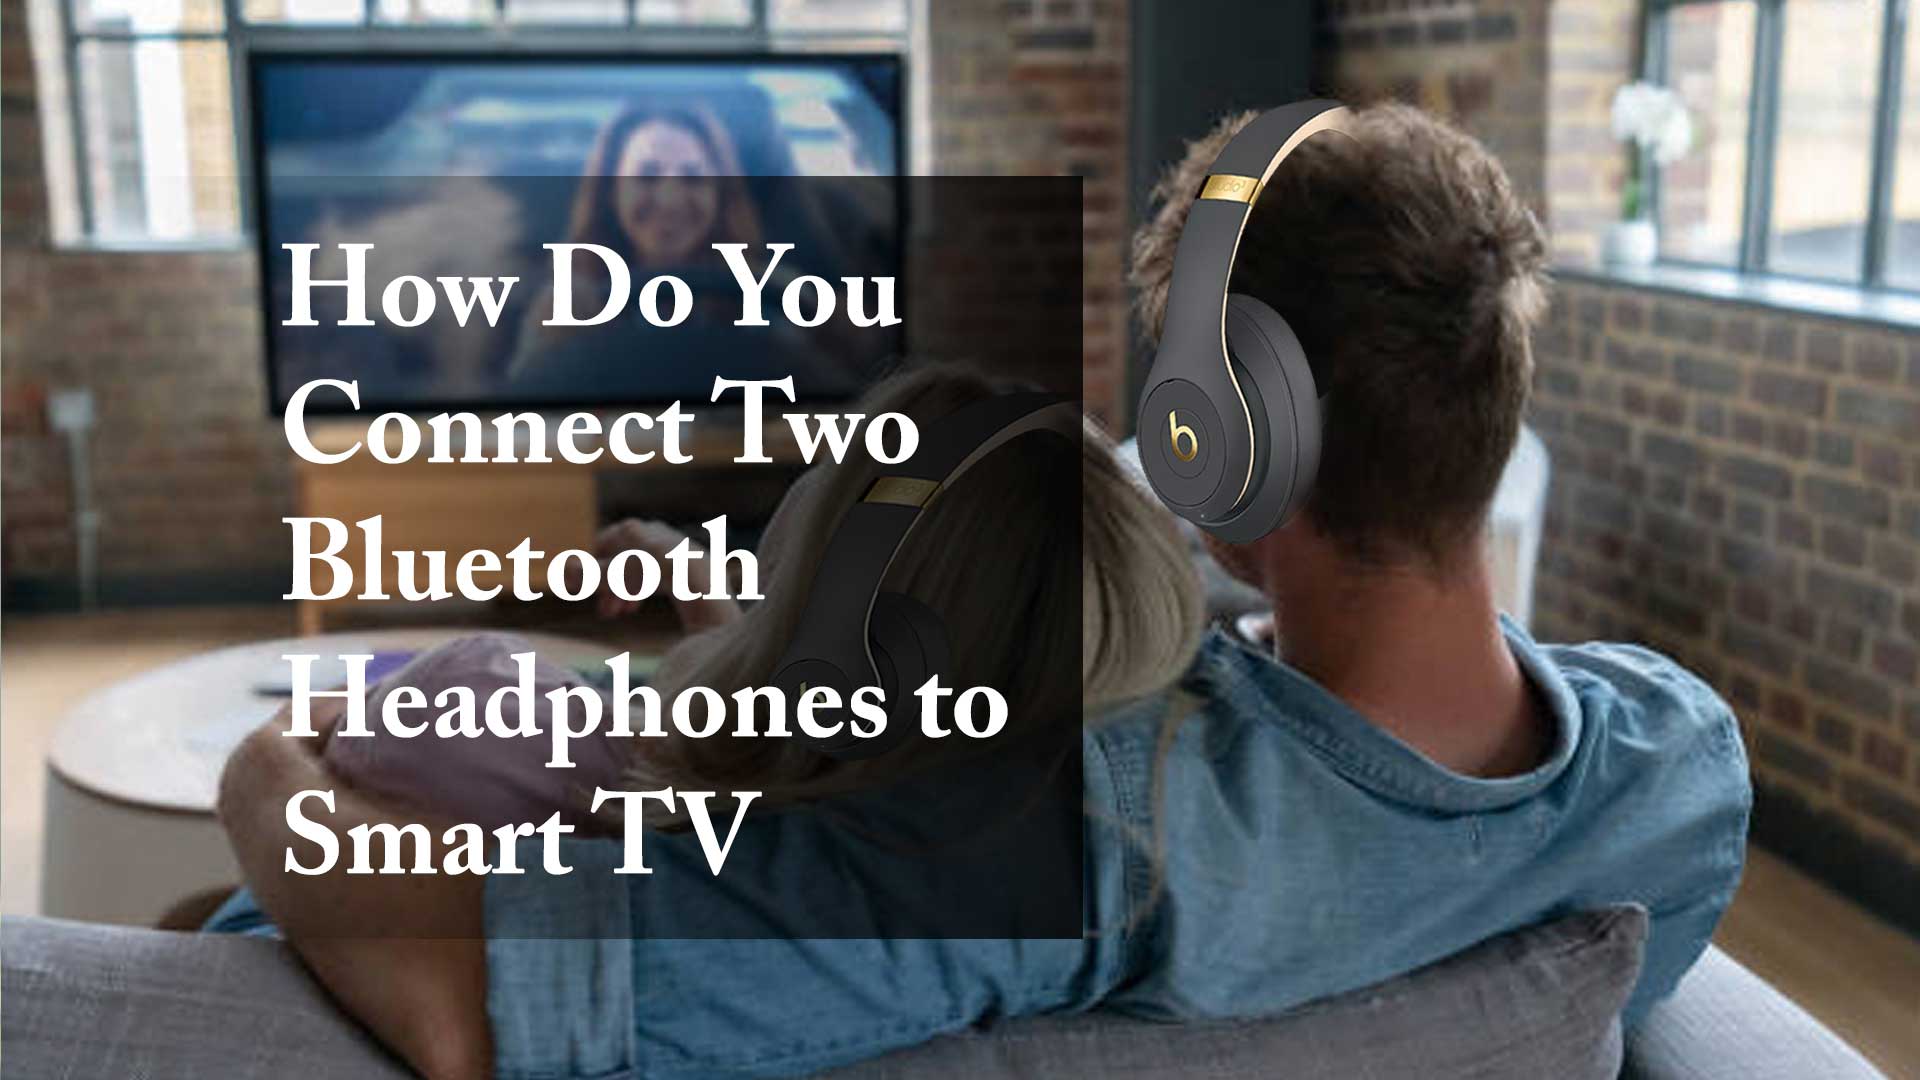 How Do You Connect Two Bluetooth Headphones to Smart TV and More